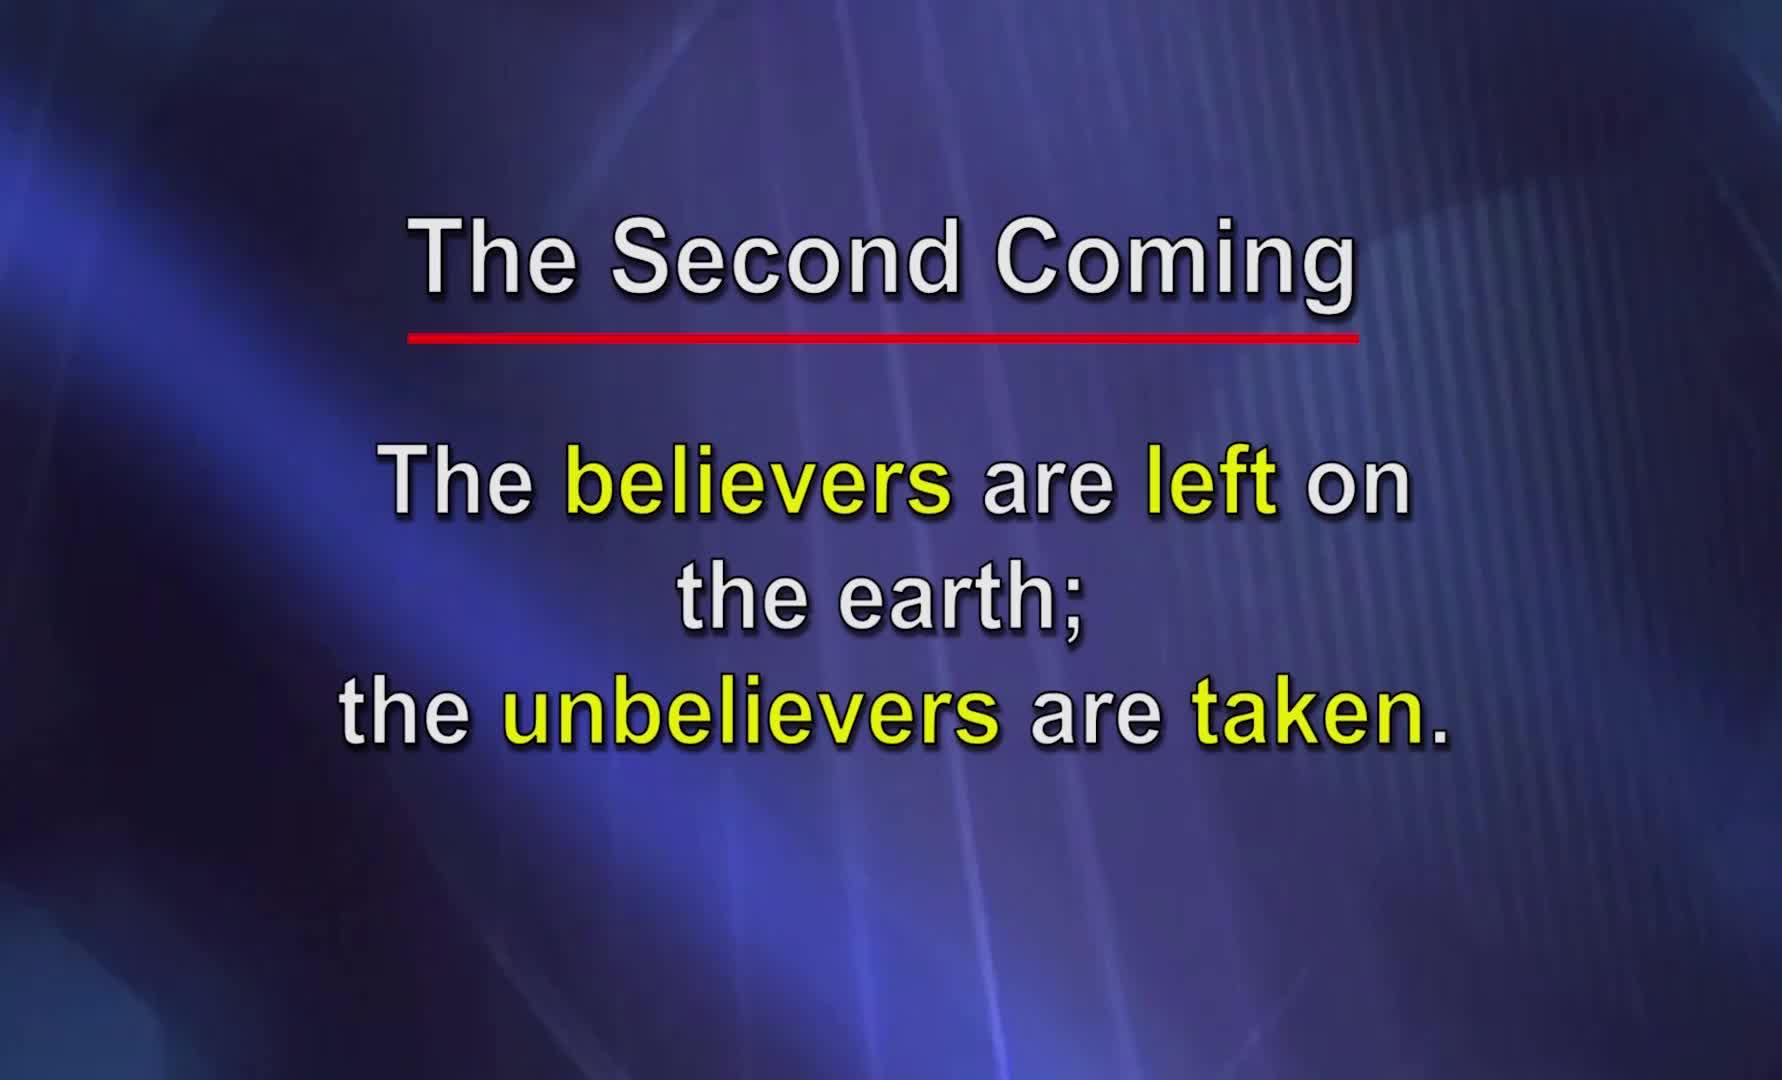 When does Jesus come at the rapture vs the second coming in relation to the tribulation?